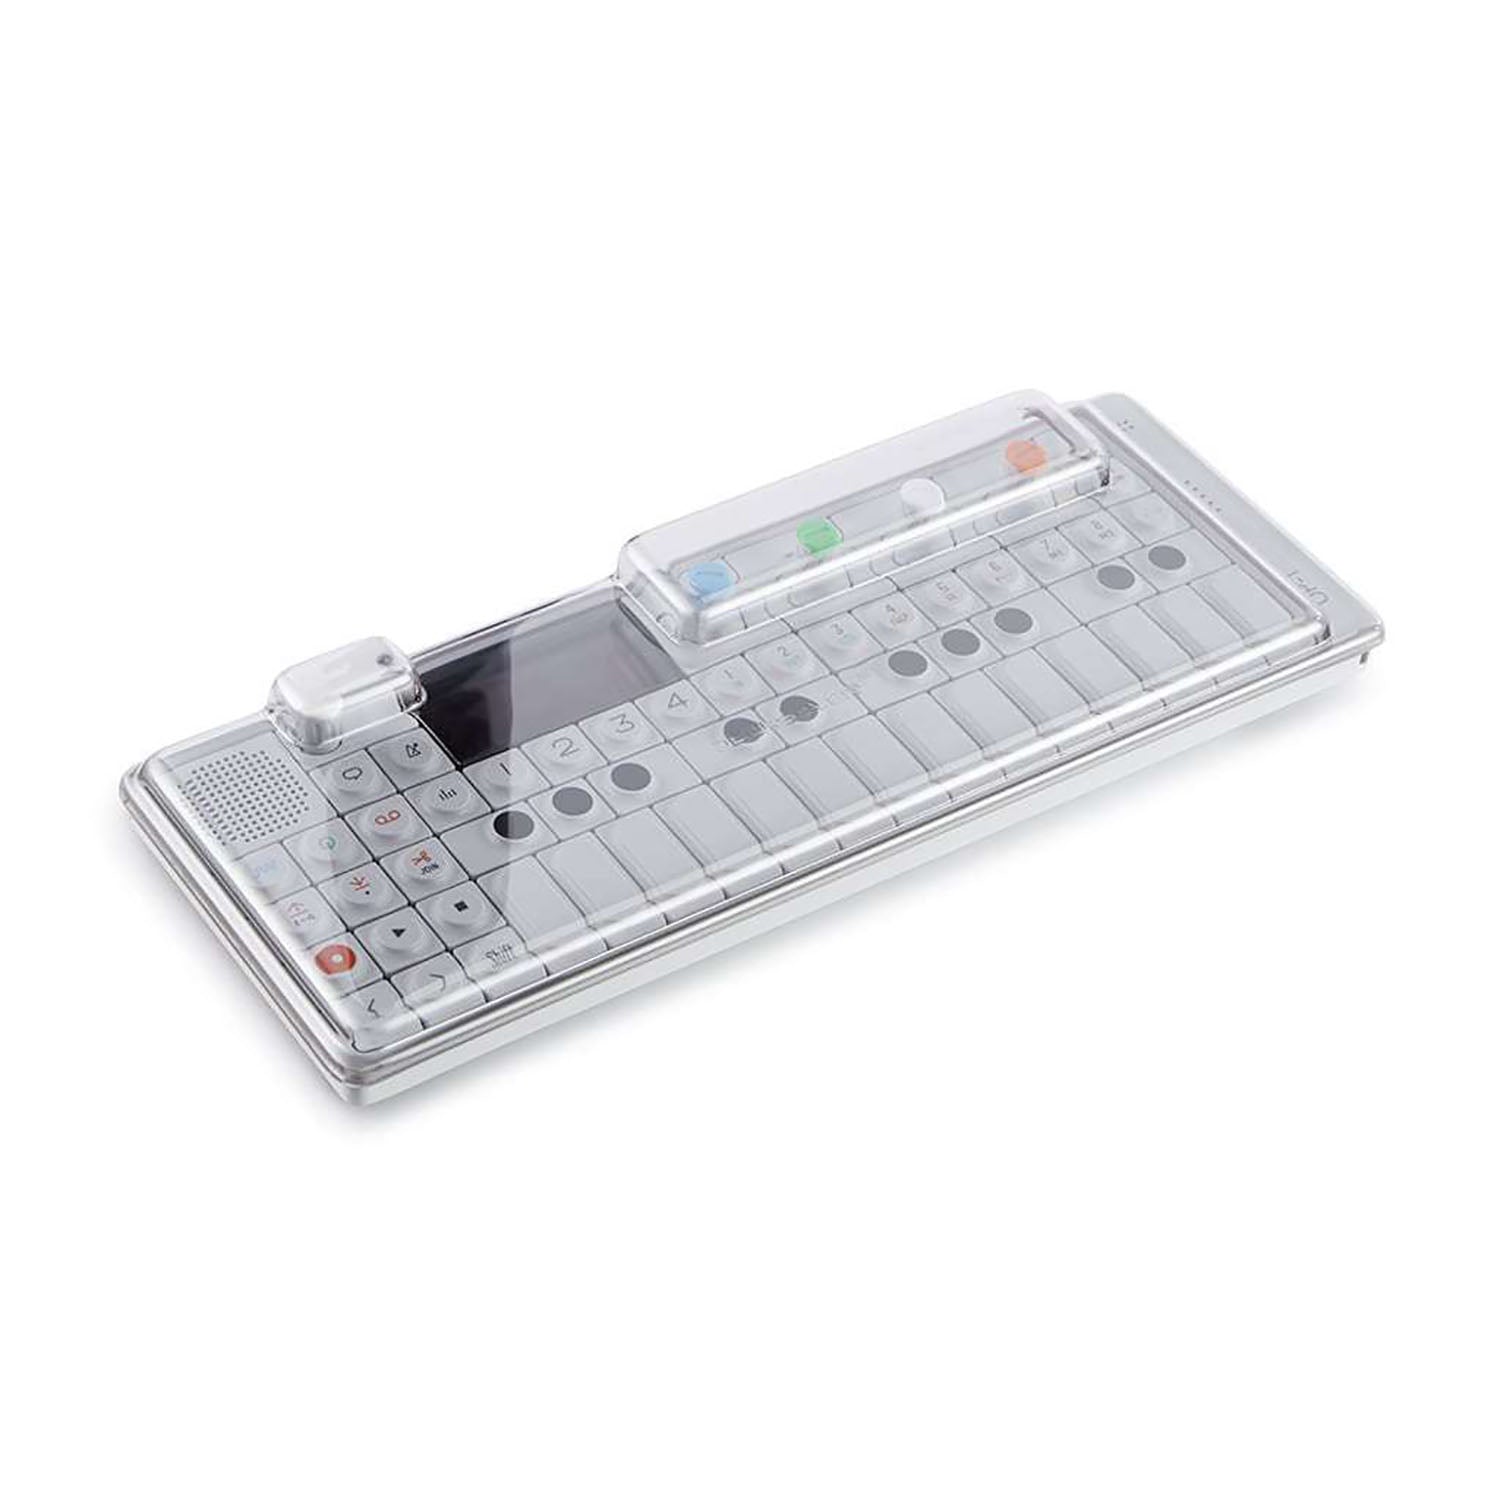 B-Stock: Decksaver DS-PC-OP1, Protection Cover For Teenage Engineering OP-1 - Hollywood DJ